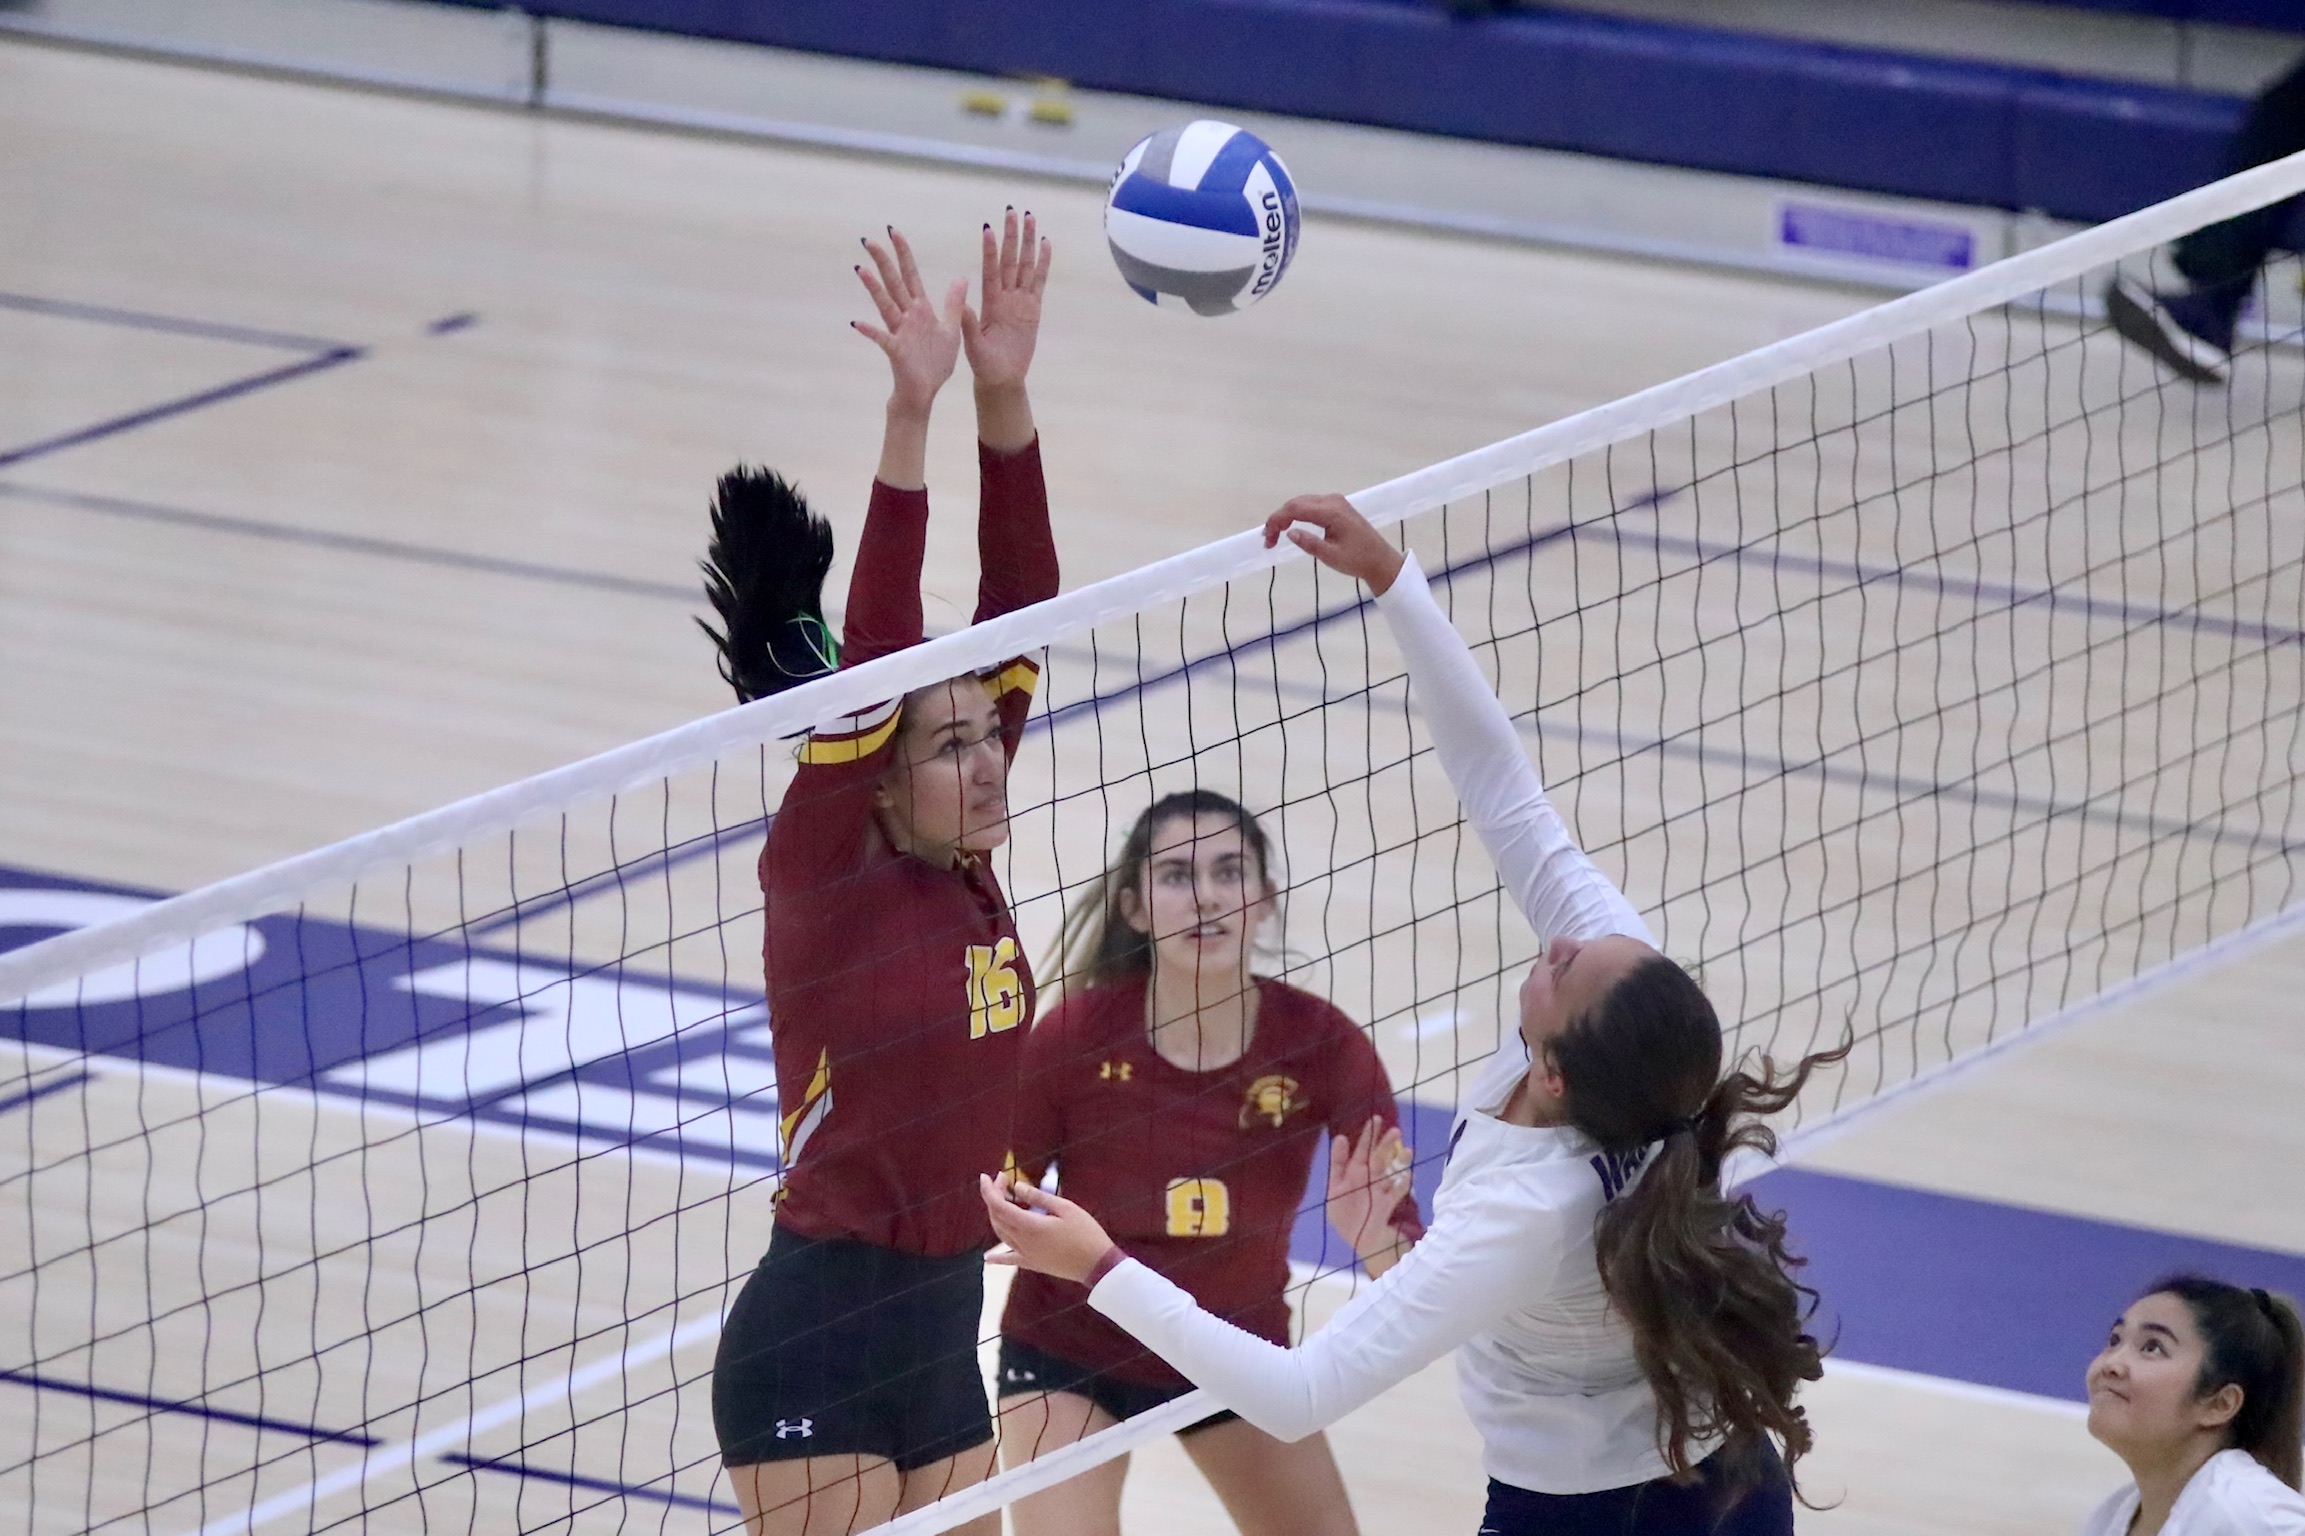 Paulina Lopez stretches out with both her hands and hair high as she attempts a block with teammate Nalani Young looking on in PCC's win at El Camino College Friday evening (photo by Michael Watkins).